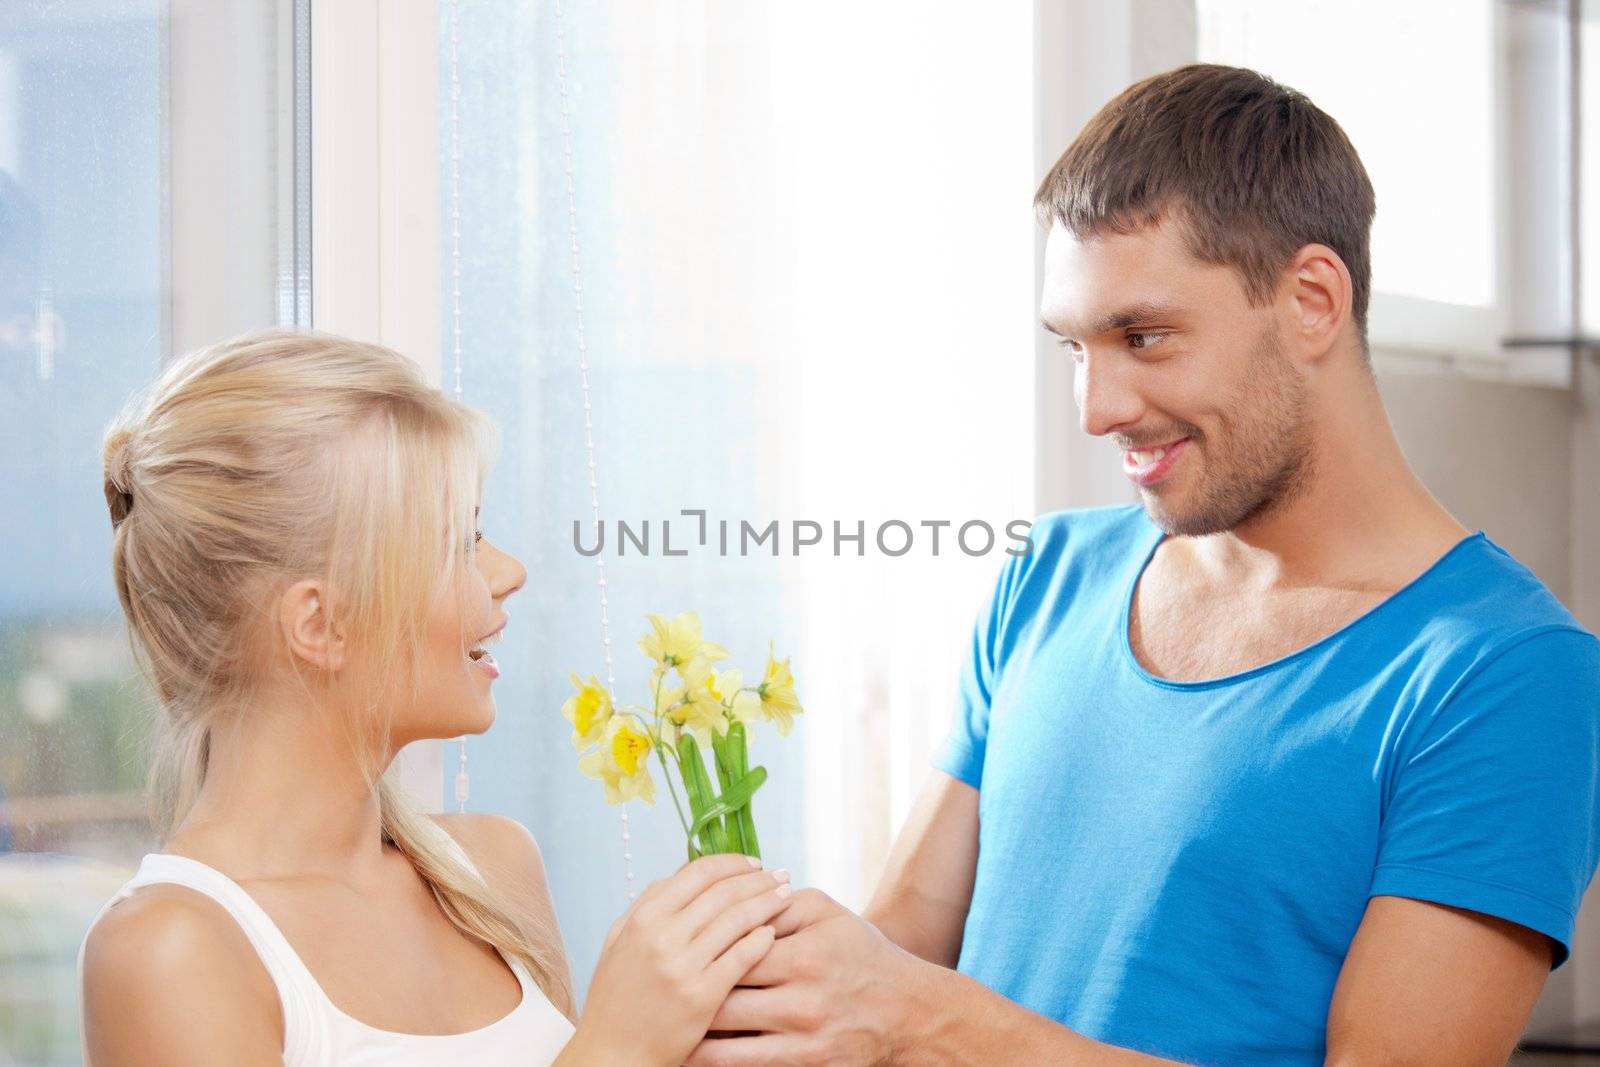 bright picture of happy romantic couple with flowers